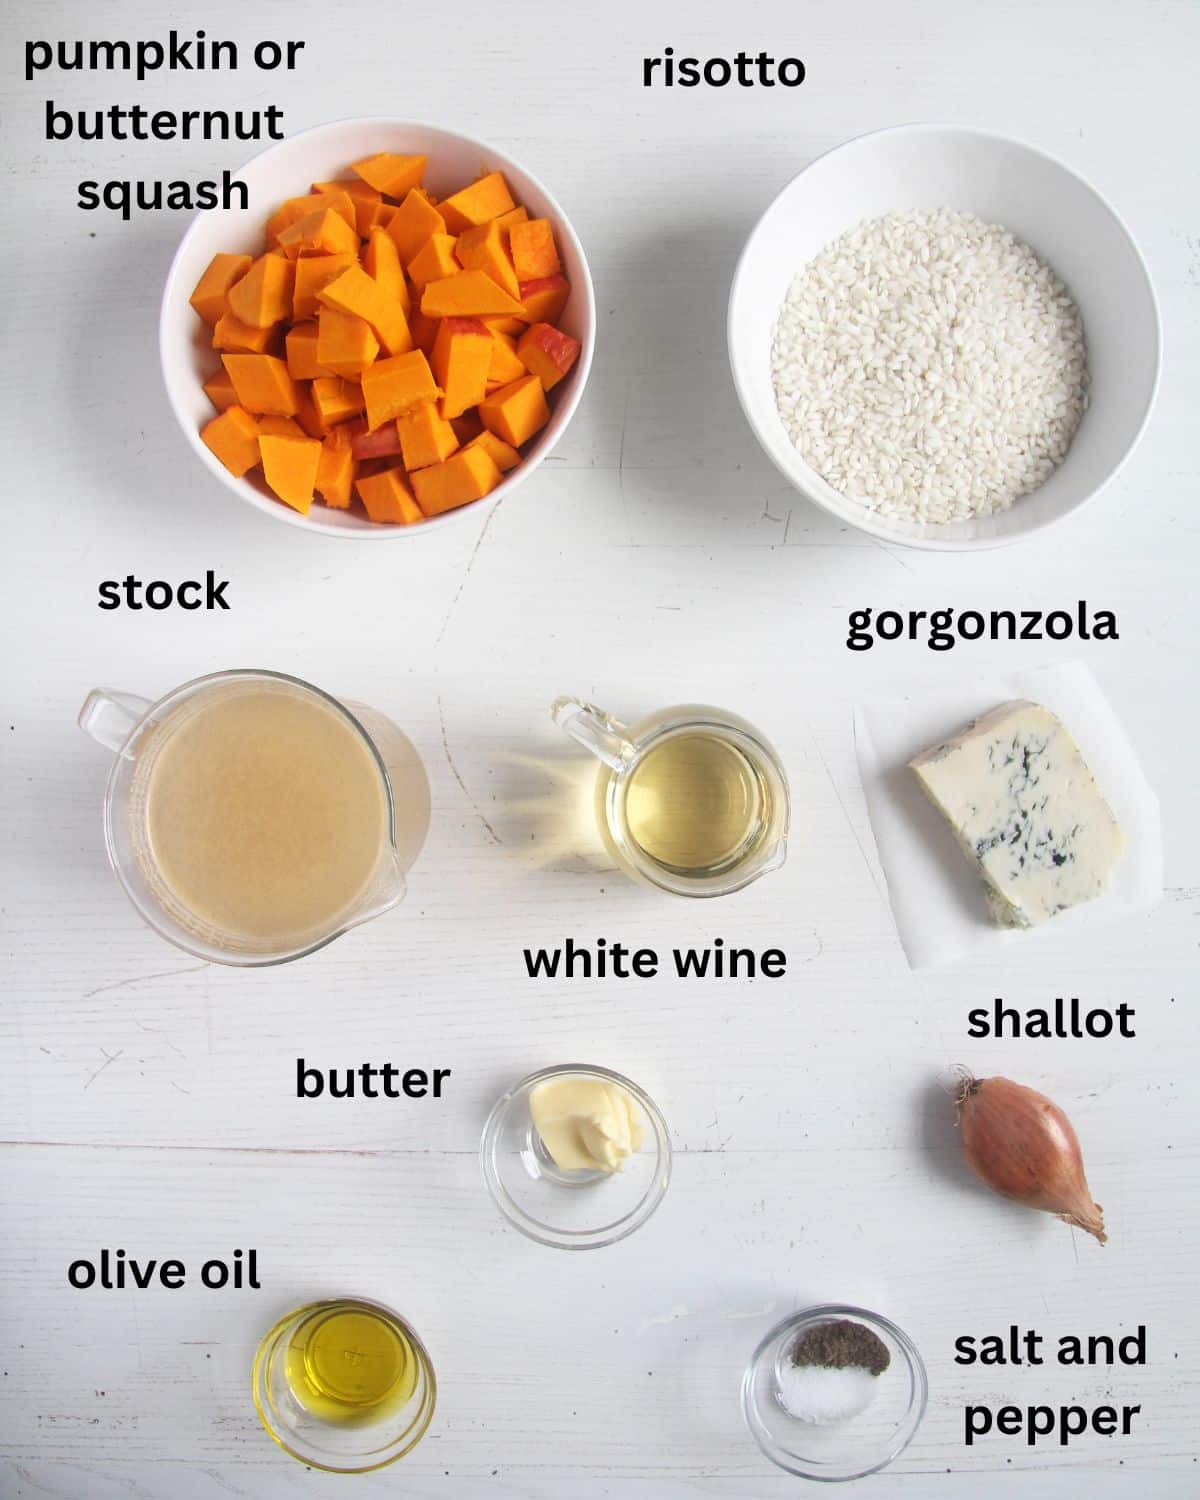 listed ingredients for making risotto with gorgonzola cheese and pumpkin.